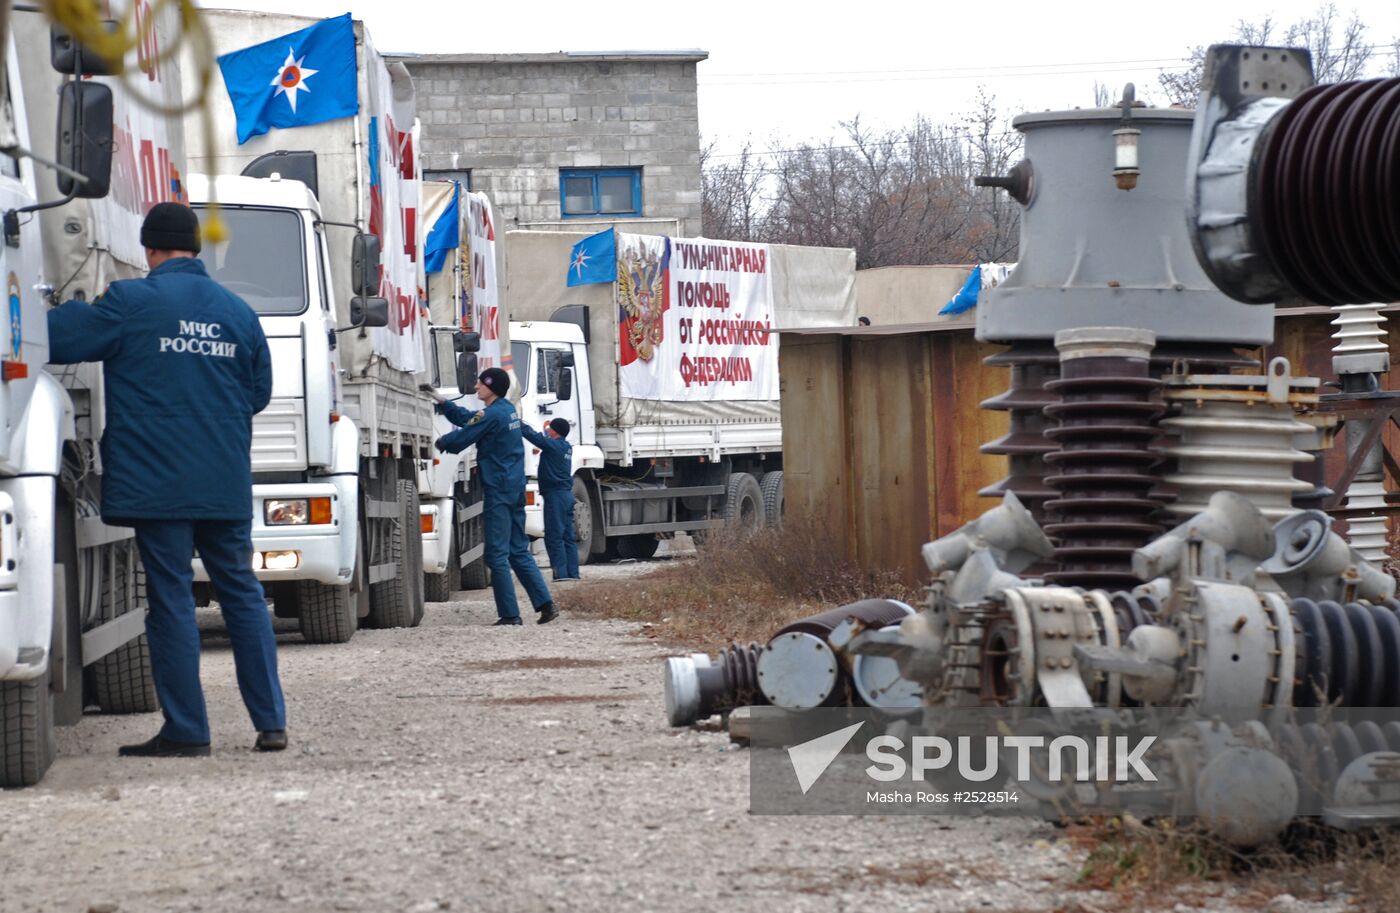 Seventh humanitarian aid convoy leaves for Ukraine